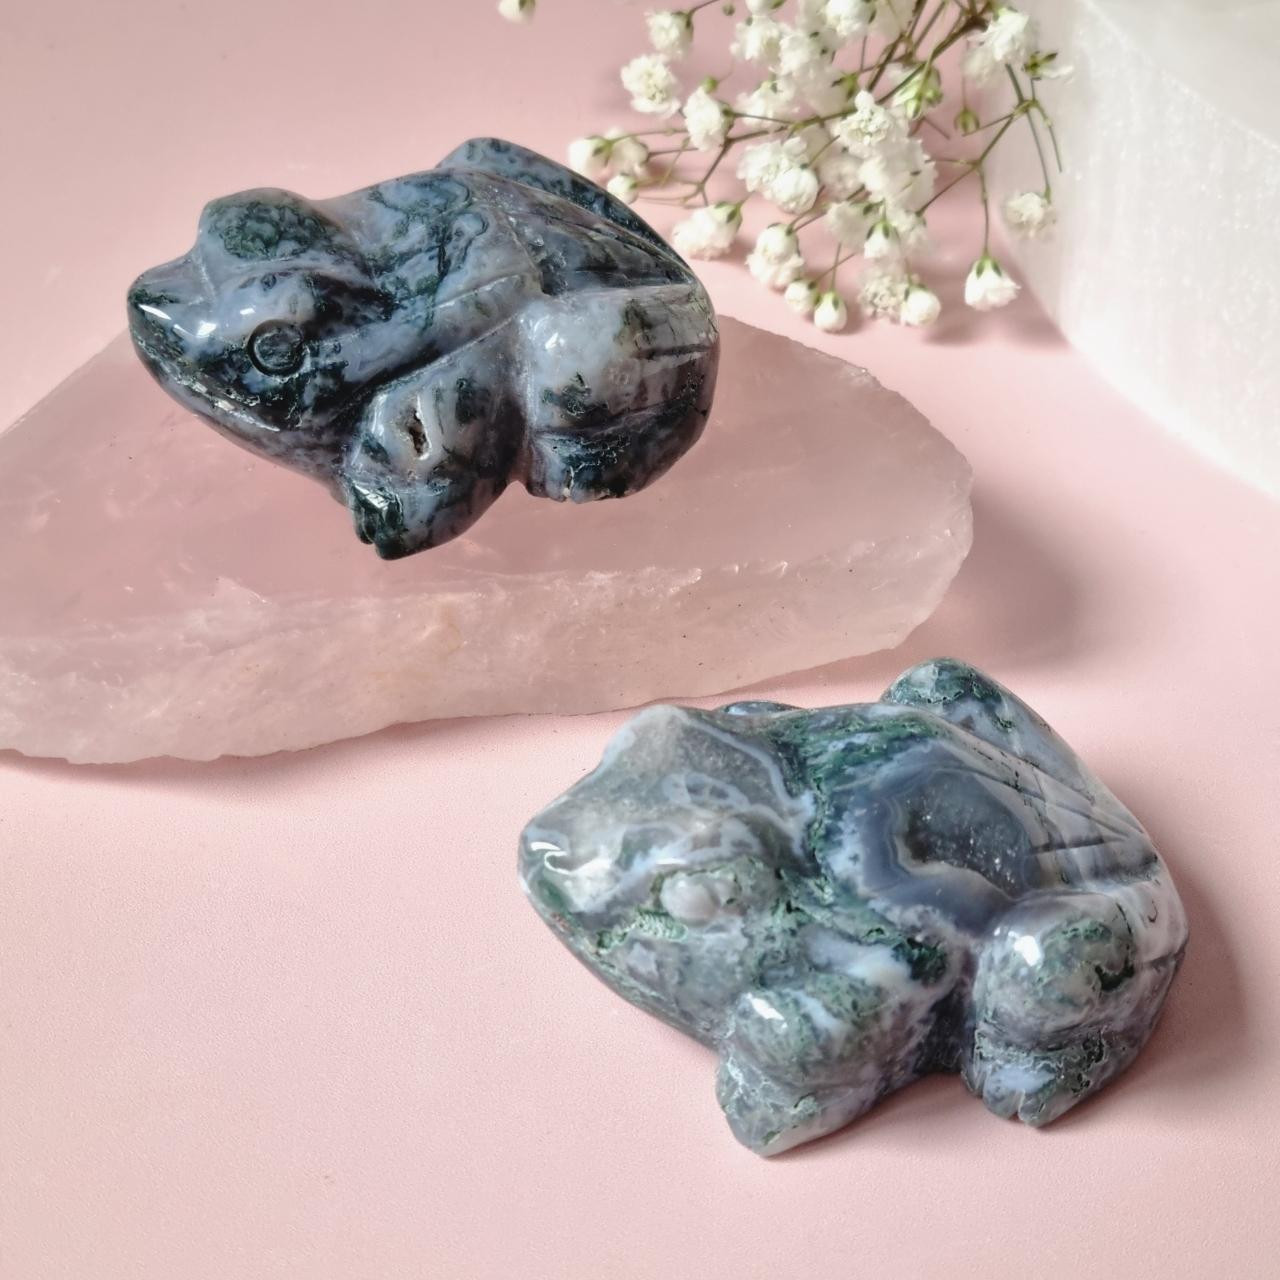 2.0 Moss Agate Frog Crystal Carving Bulk Wholesale